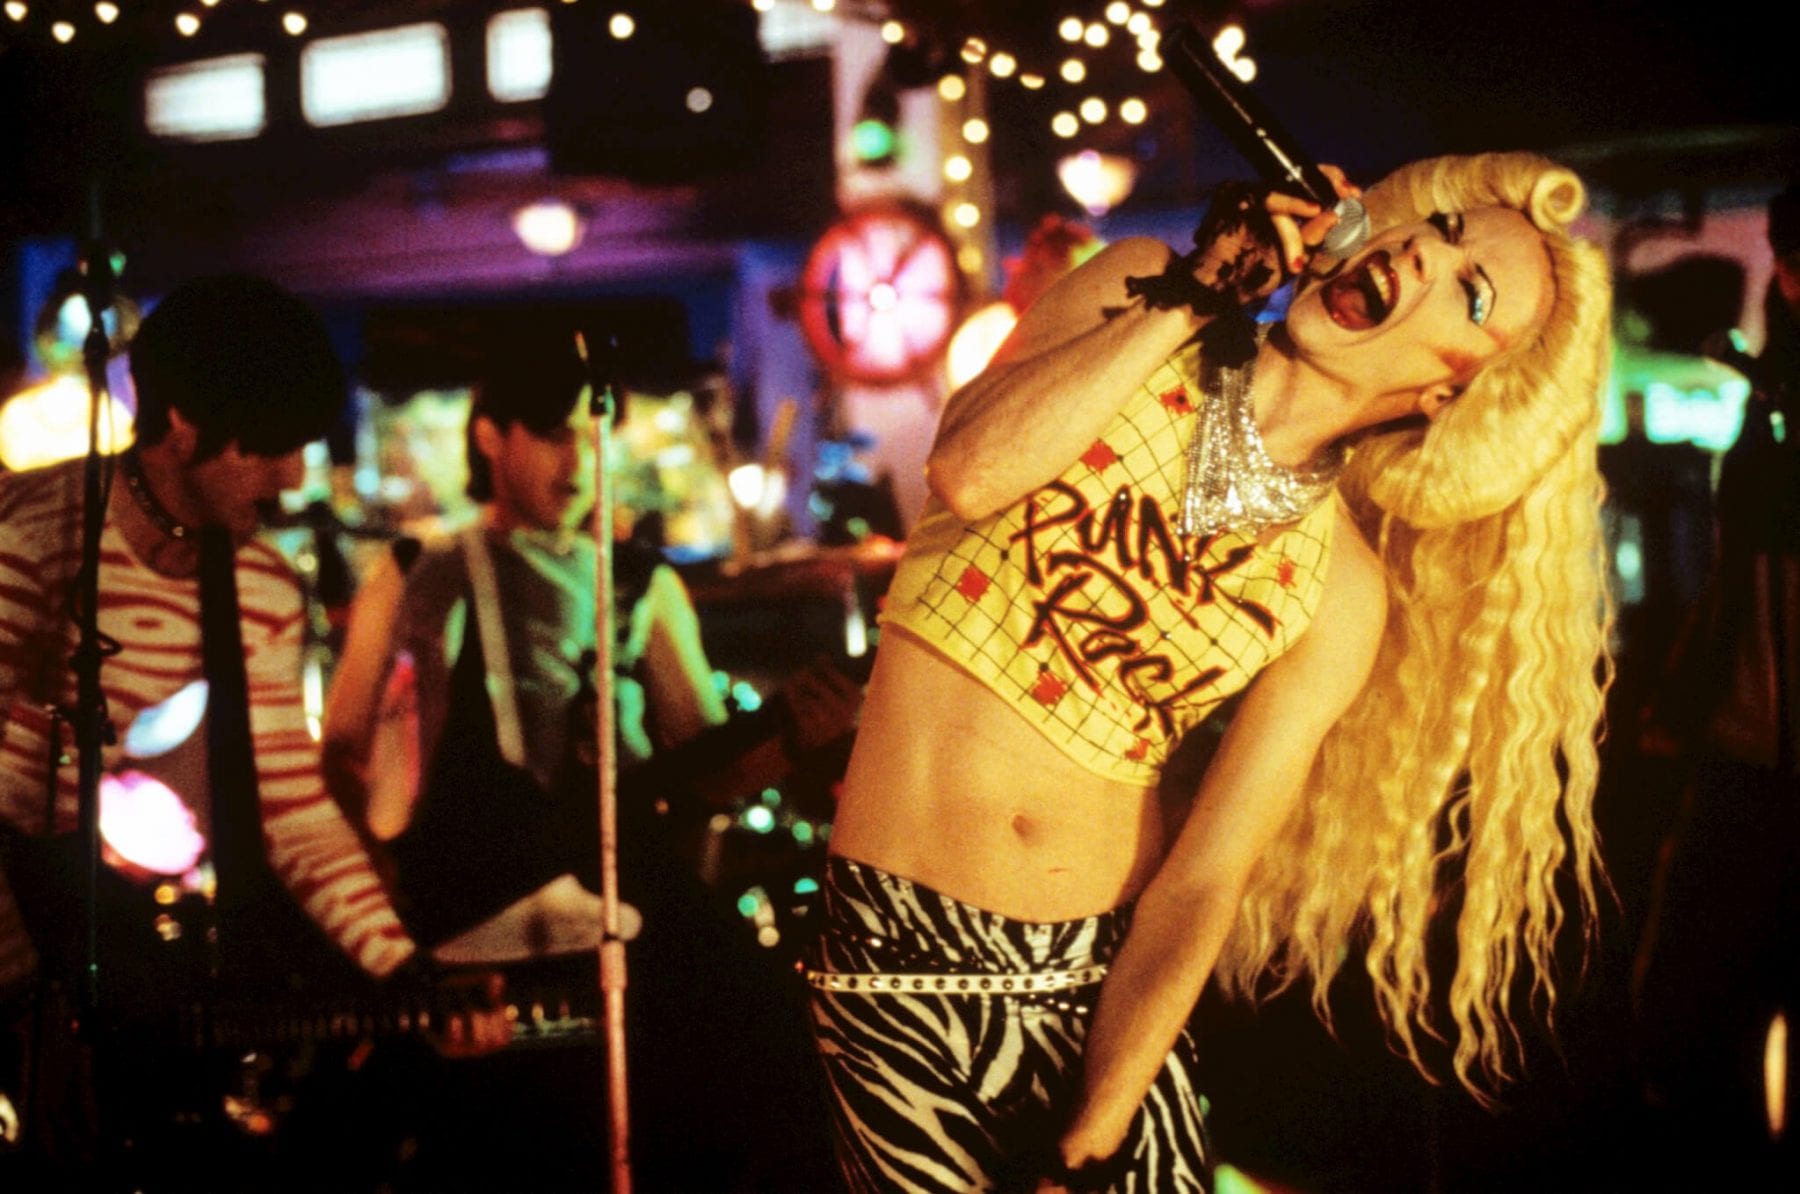 John Cameron Mitchell is the writer, director, and star of "Hedwig and the Angry Inch".